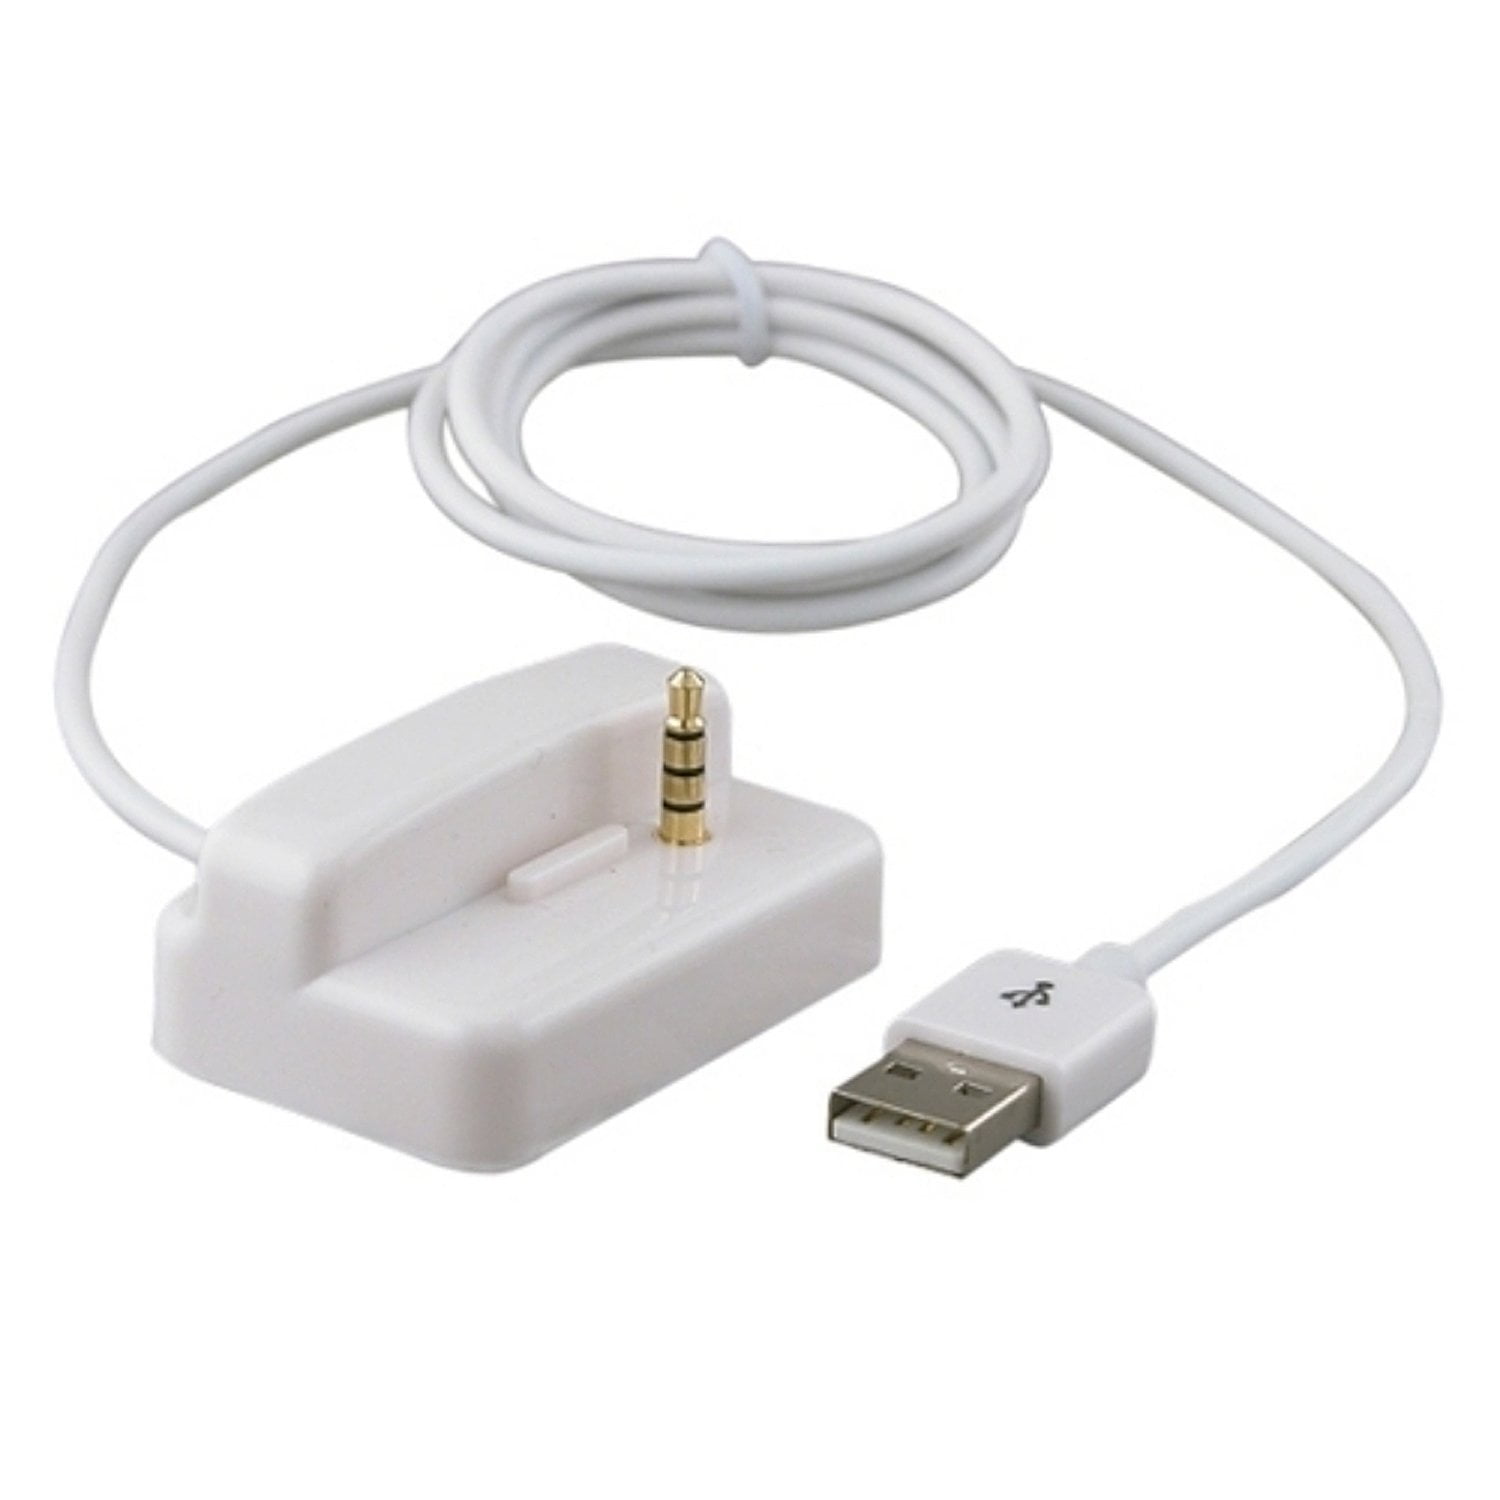 USB Charger Dock Docking Station Schnur Cable für iPod Shuffle 2Nd Gen White 